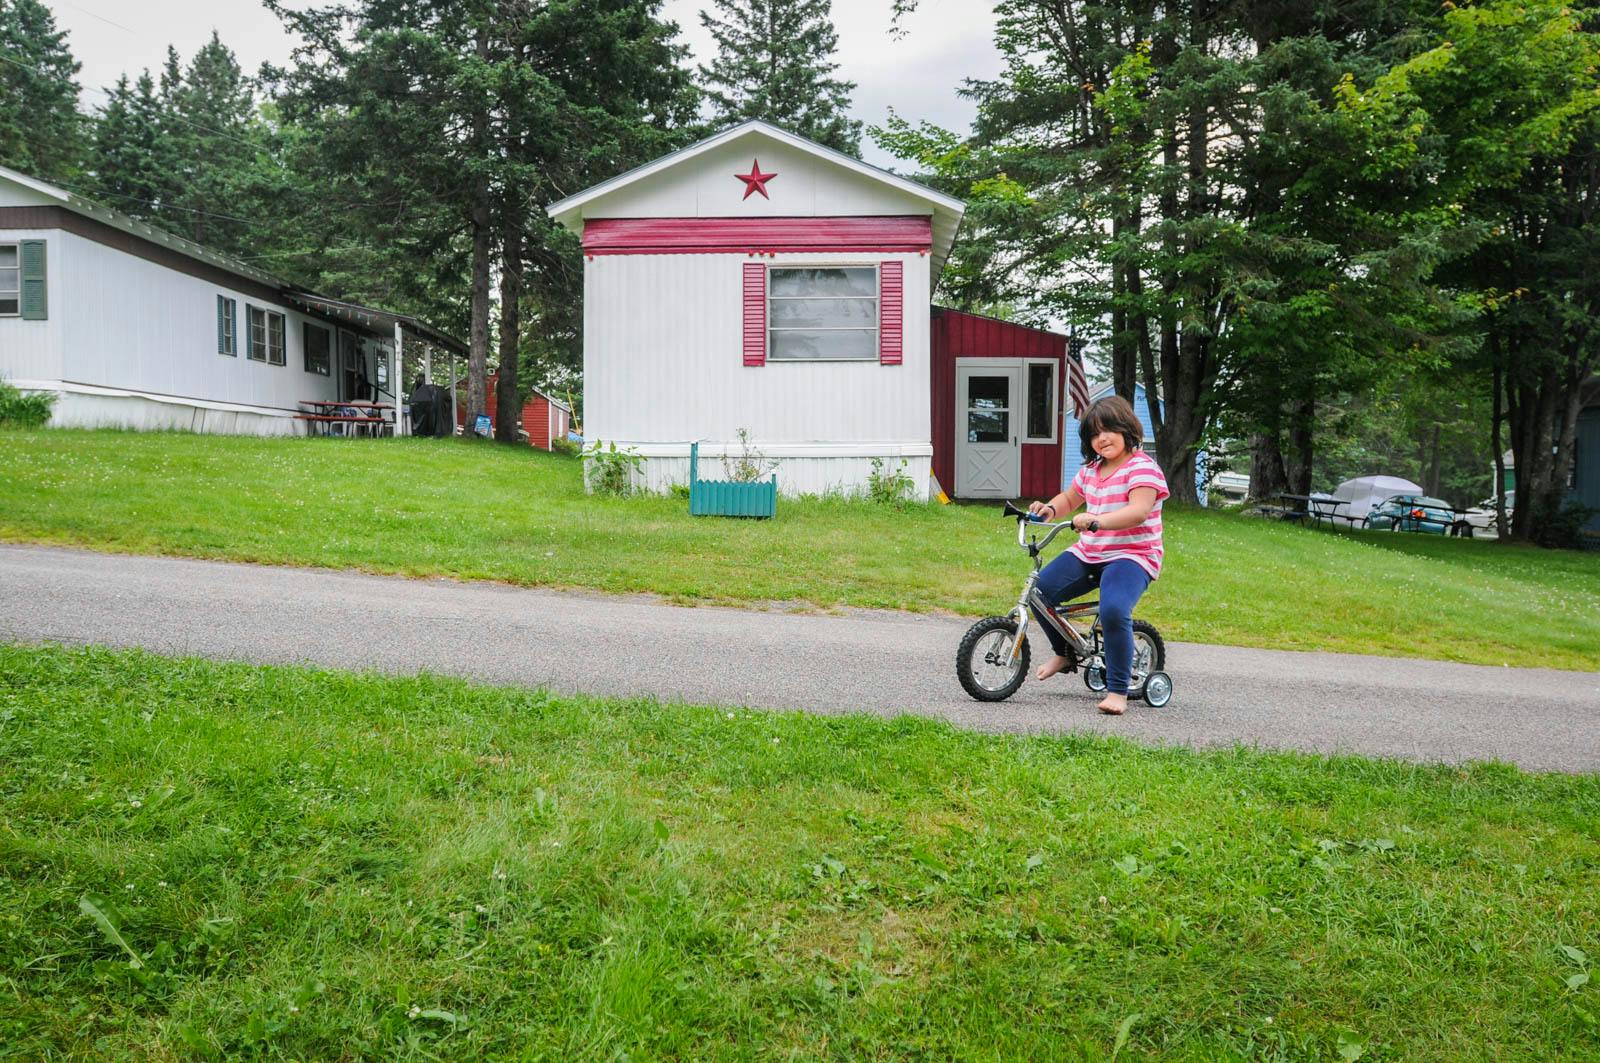 A young girl on a bicycle in a trailer park in Lancaster, New Hampshire.